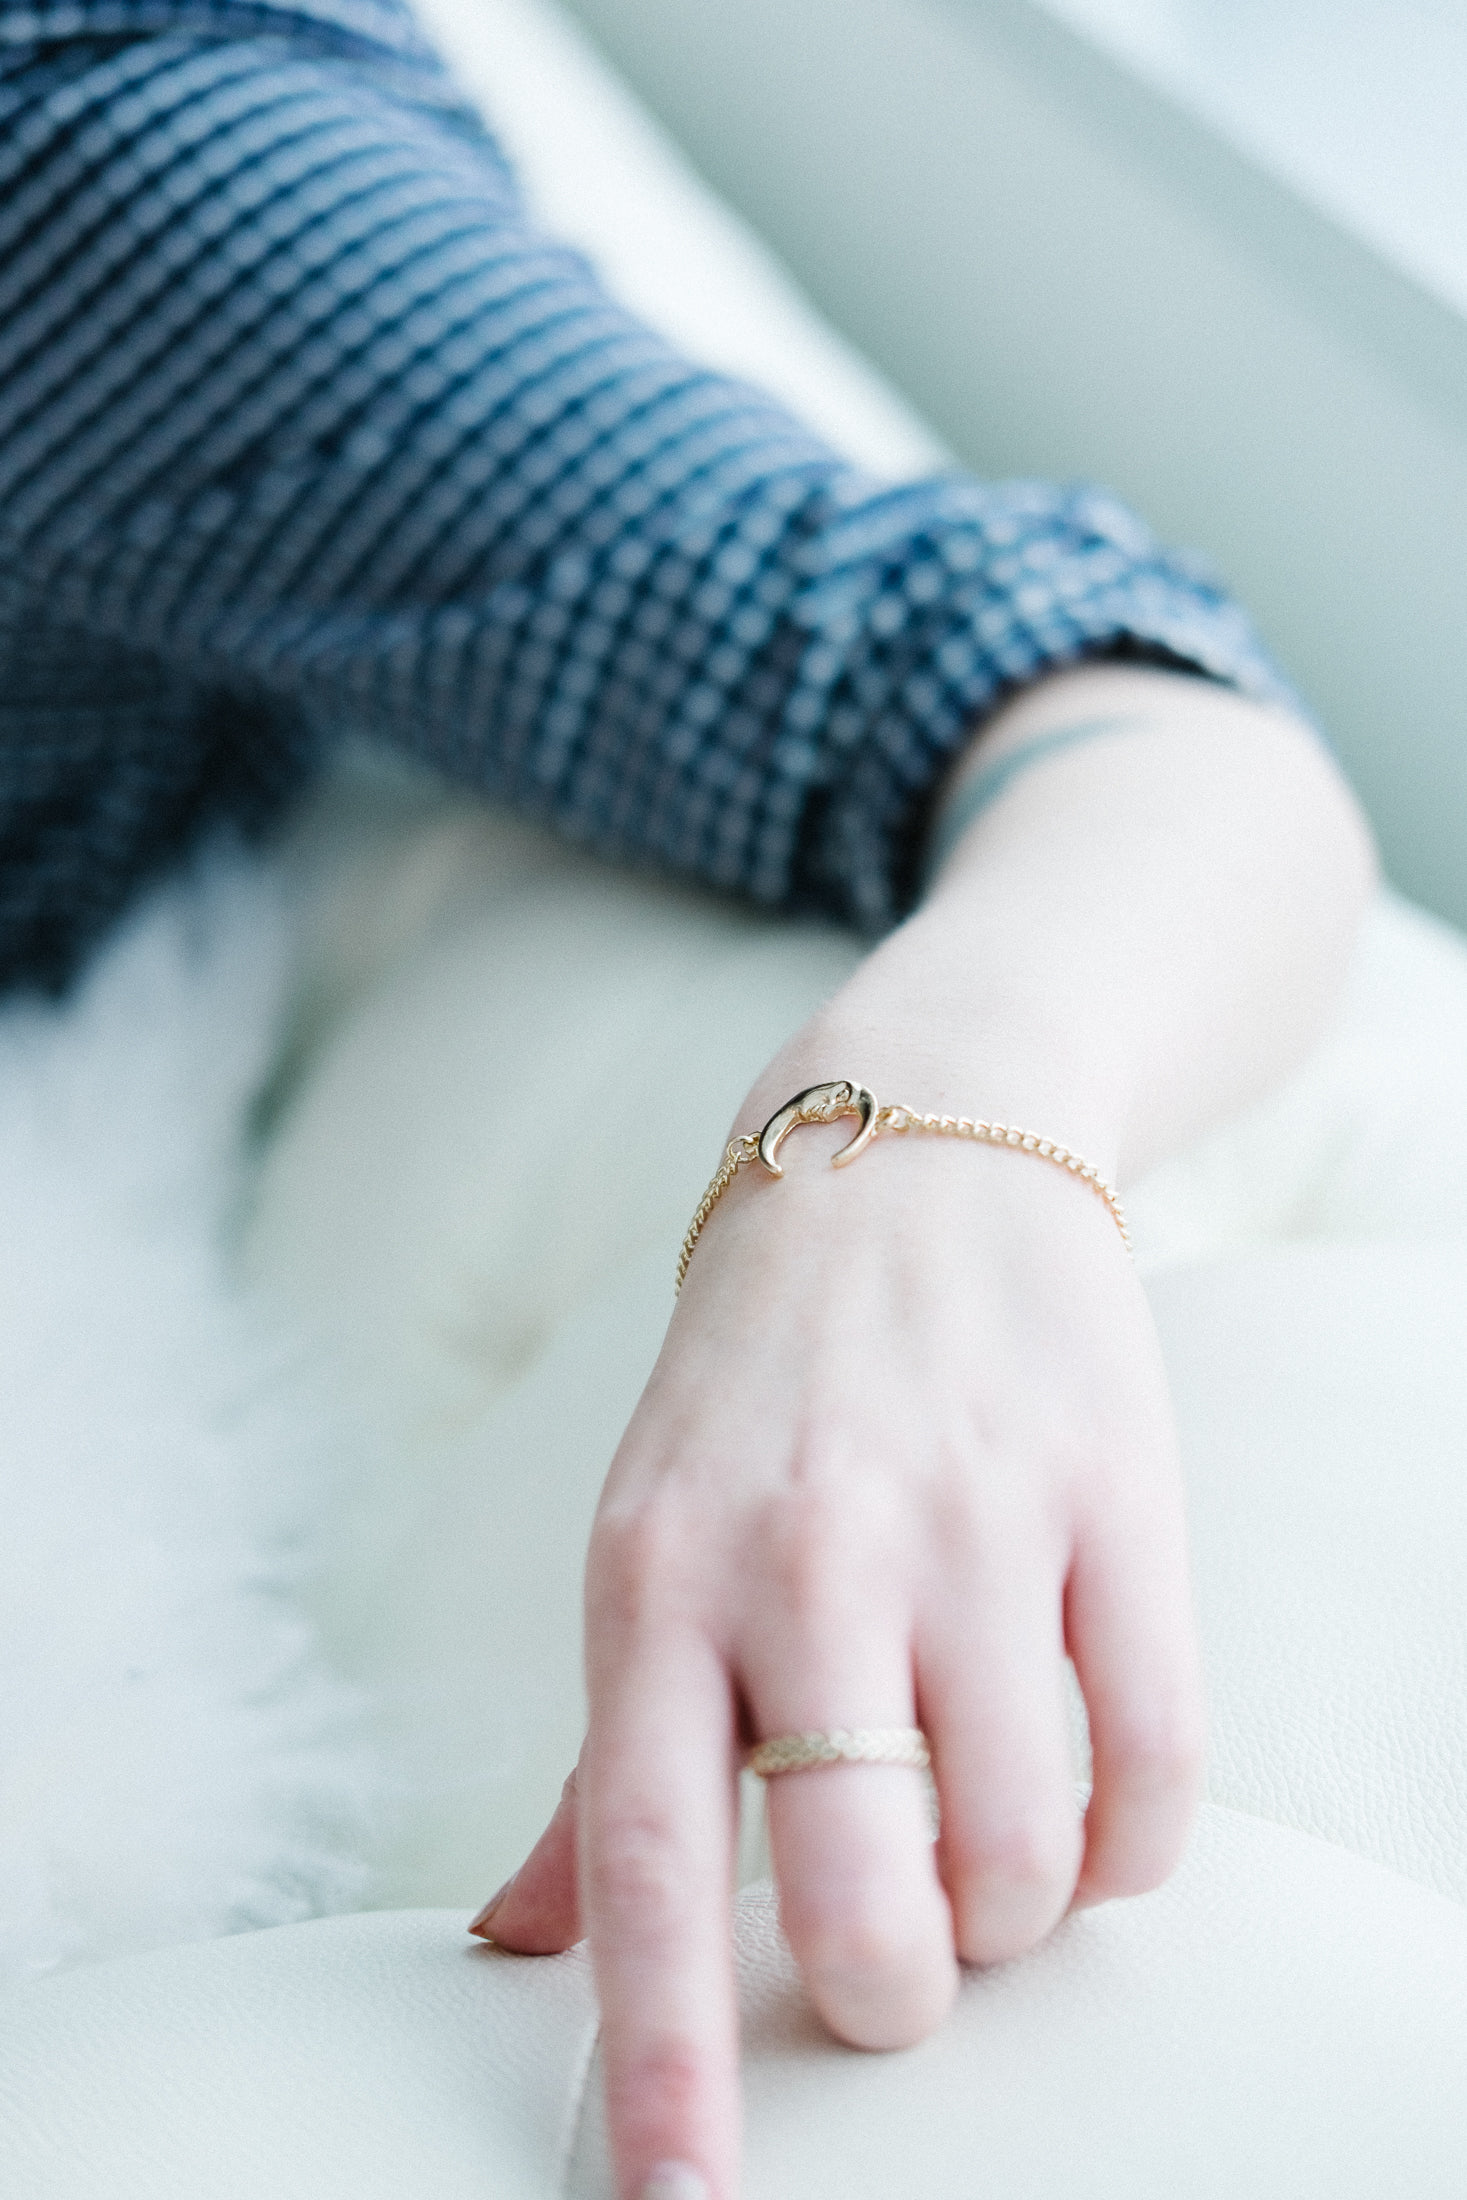 Close-Up Photography of Girl's Left Hand Wearing Bracelet · Free Stock Photo